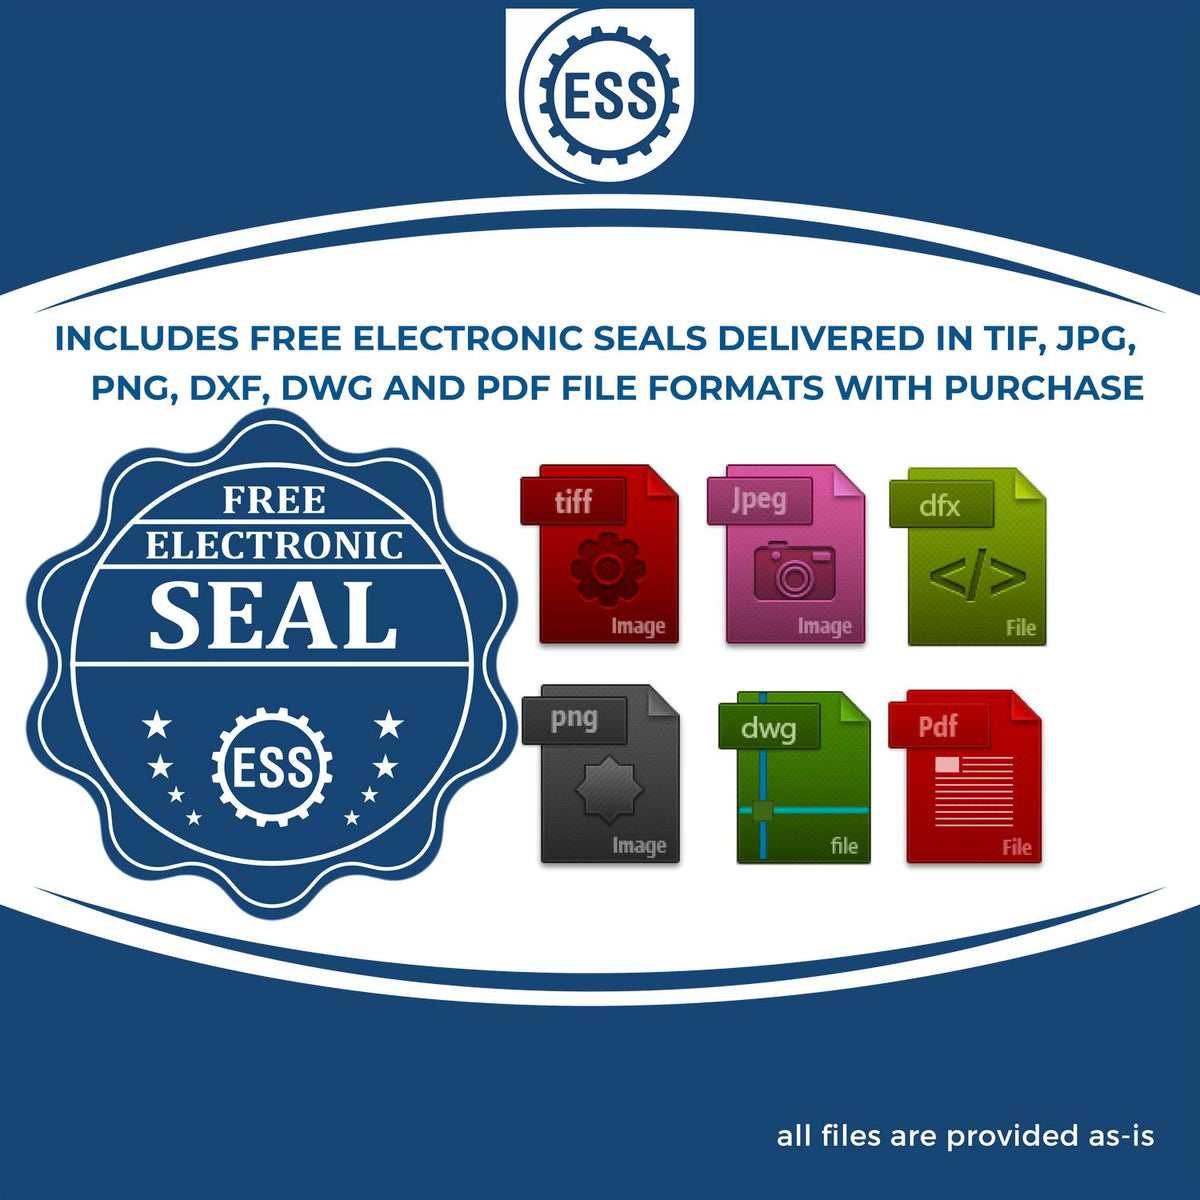 An infographic for the free electronic seal for the Vermont Professional Engineer Seal Stamp illustrating the different file type icons such as DXF, DWG, TIF, JPG and PNG.